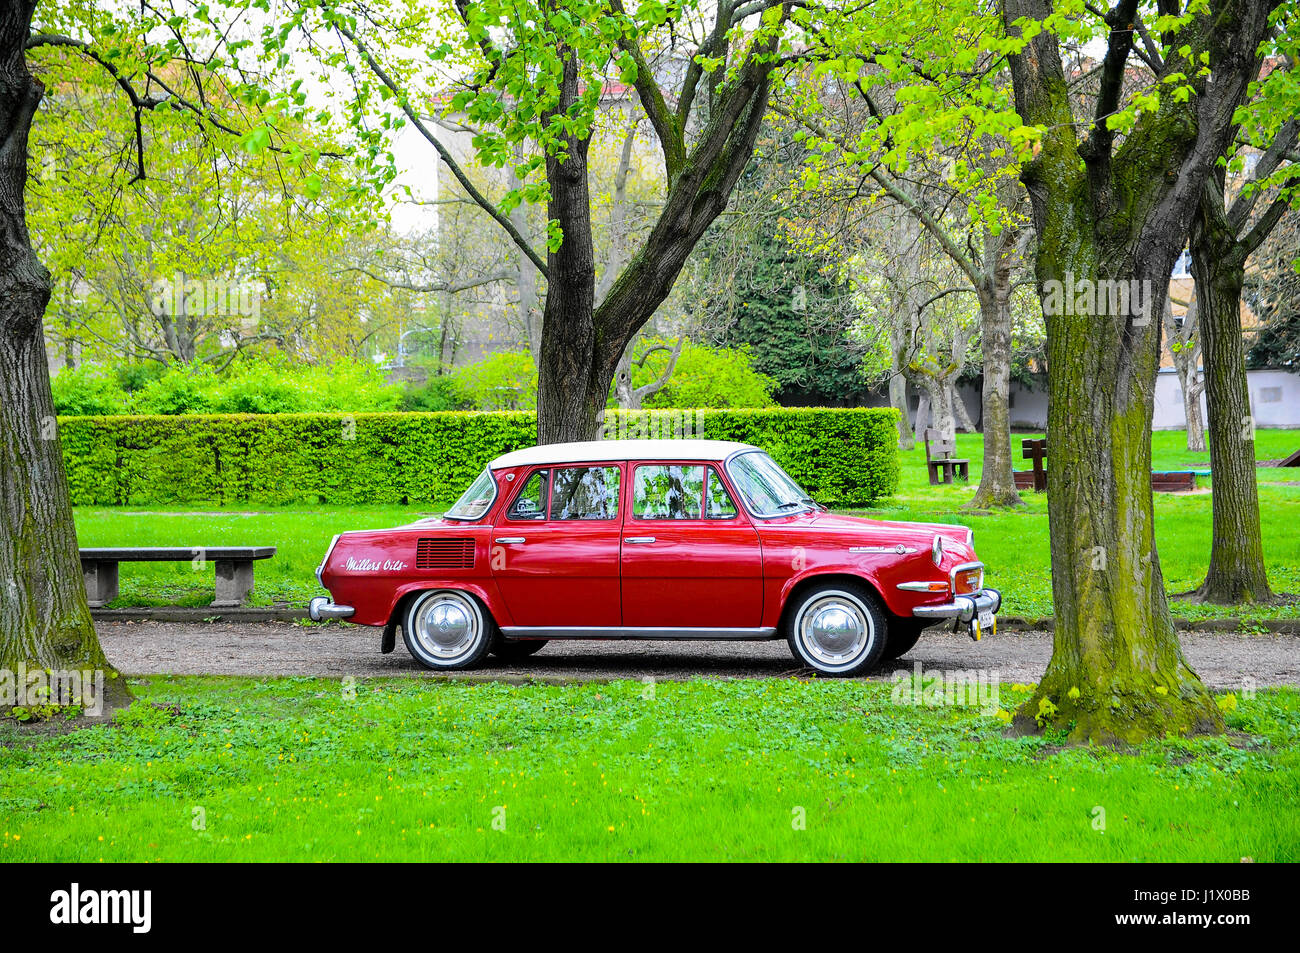 The Škoda red 1000 MB and Škoda 1100 MB are two rear-engined, rear-wheel drive small family cars that were produced by Czechoslovak manufacturer AZNP Stock Photo